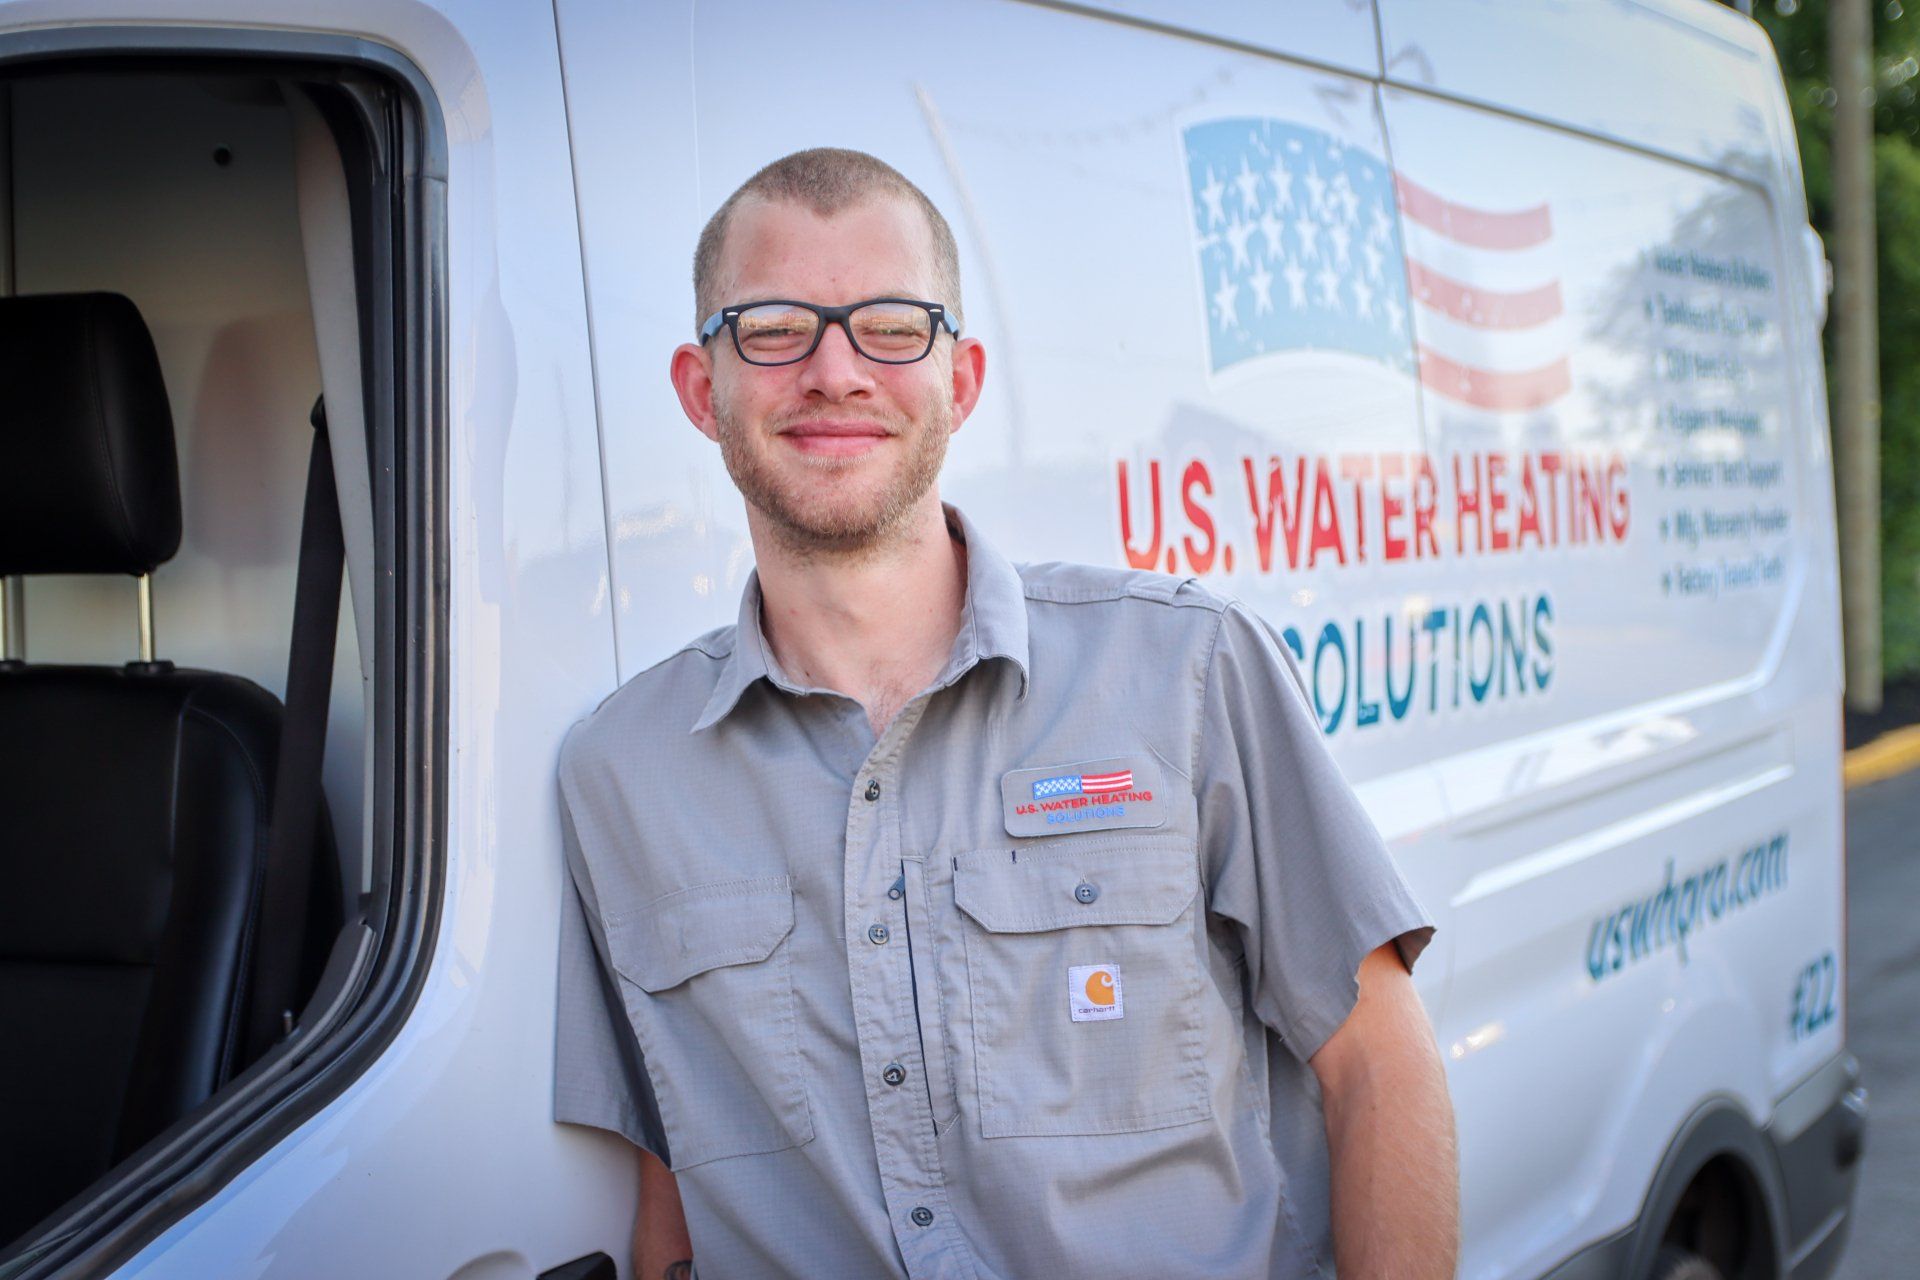 Water Heater Repair Technician Stephen H. leaning against his uswhpro truck